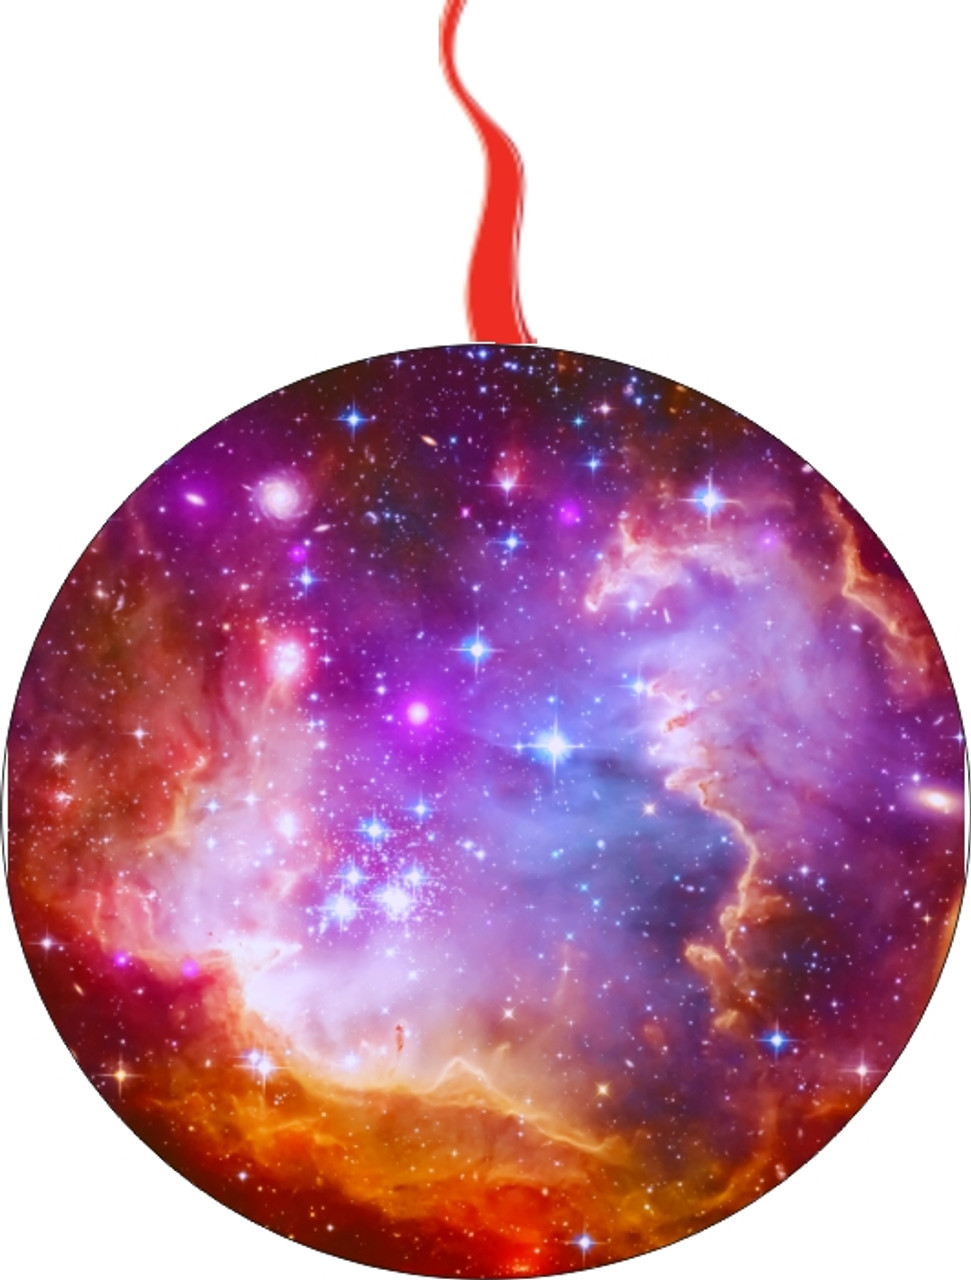 Abstract Illustration With A Beautiful Star Space Nebula Christmas Ornament